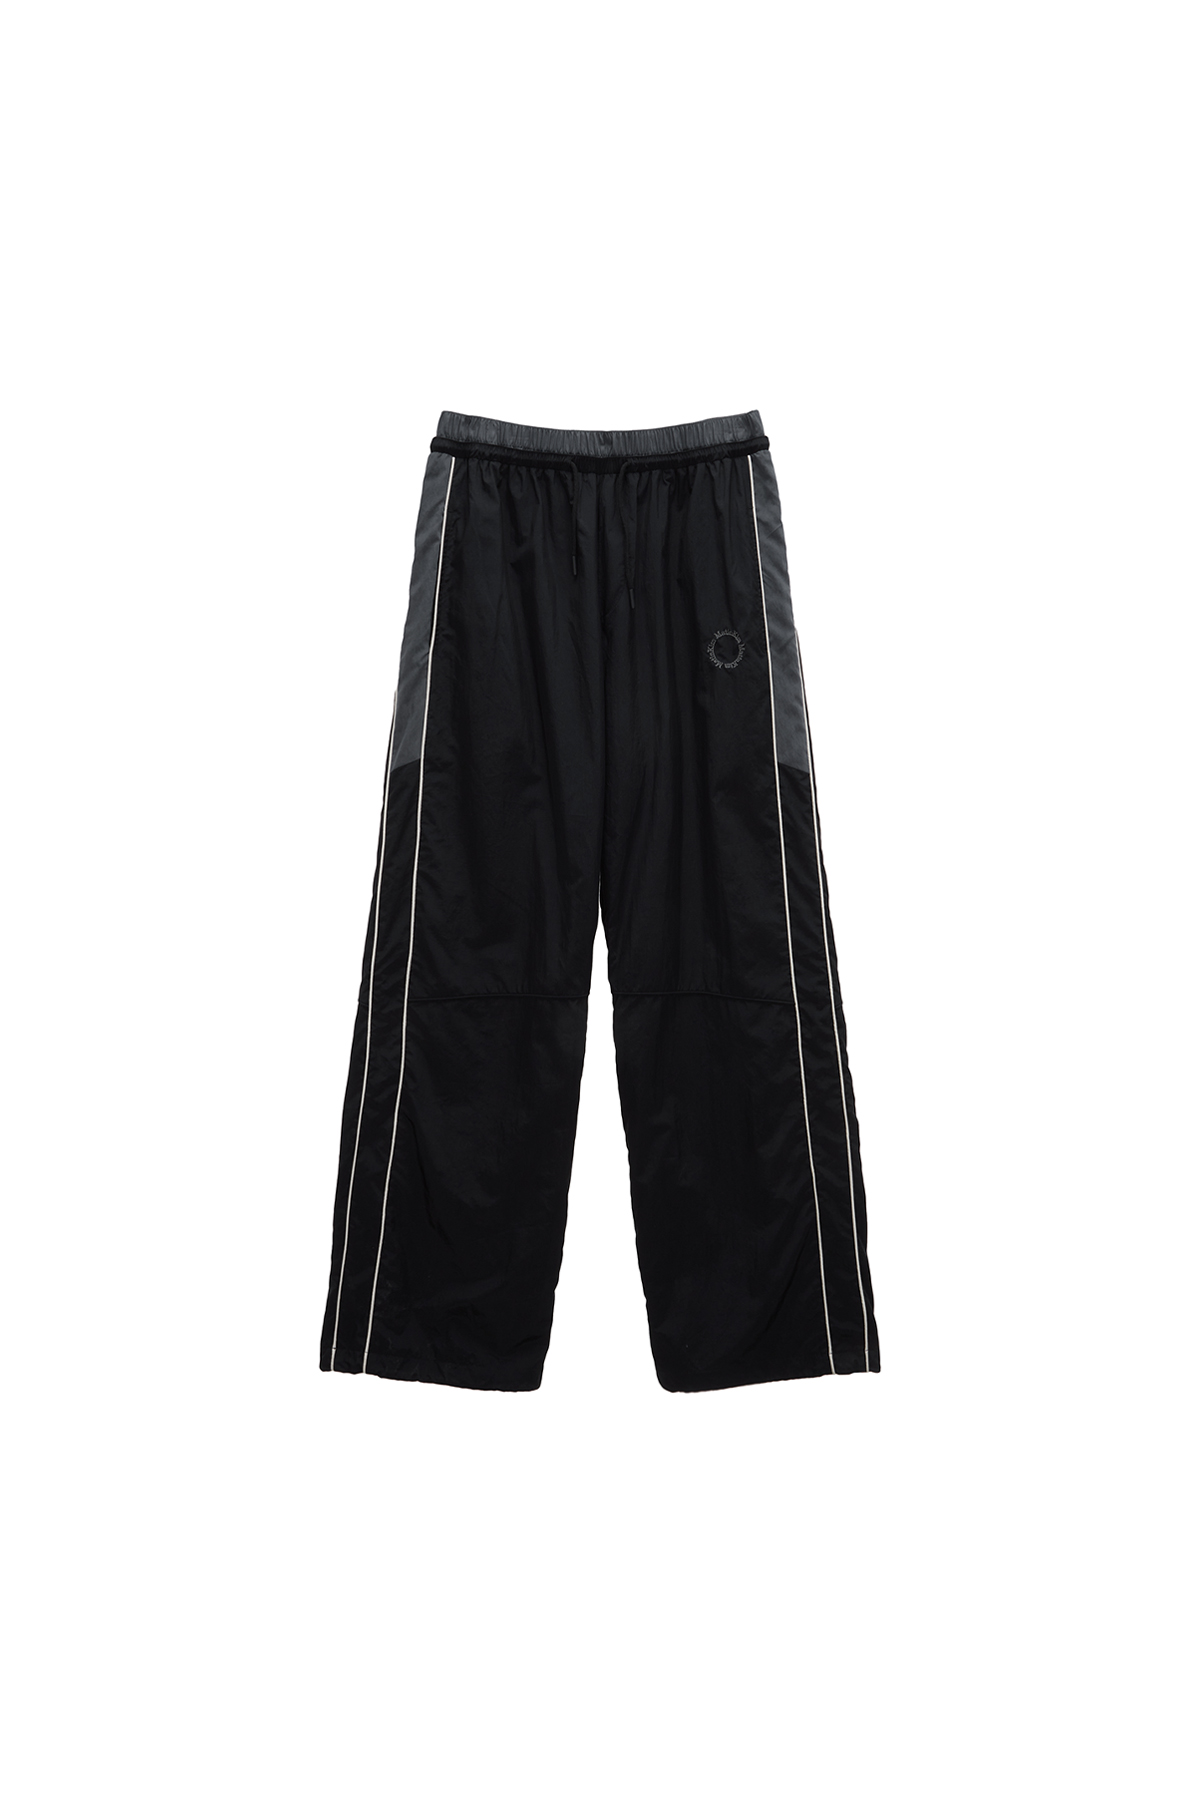 SIDE PIPING TRACK PANTS IN BLACK